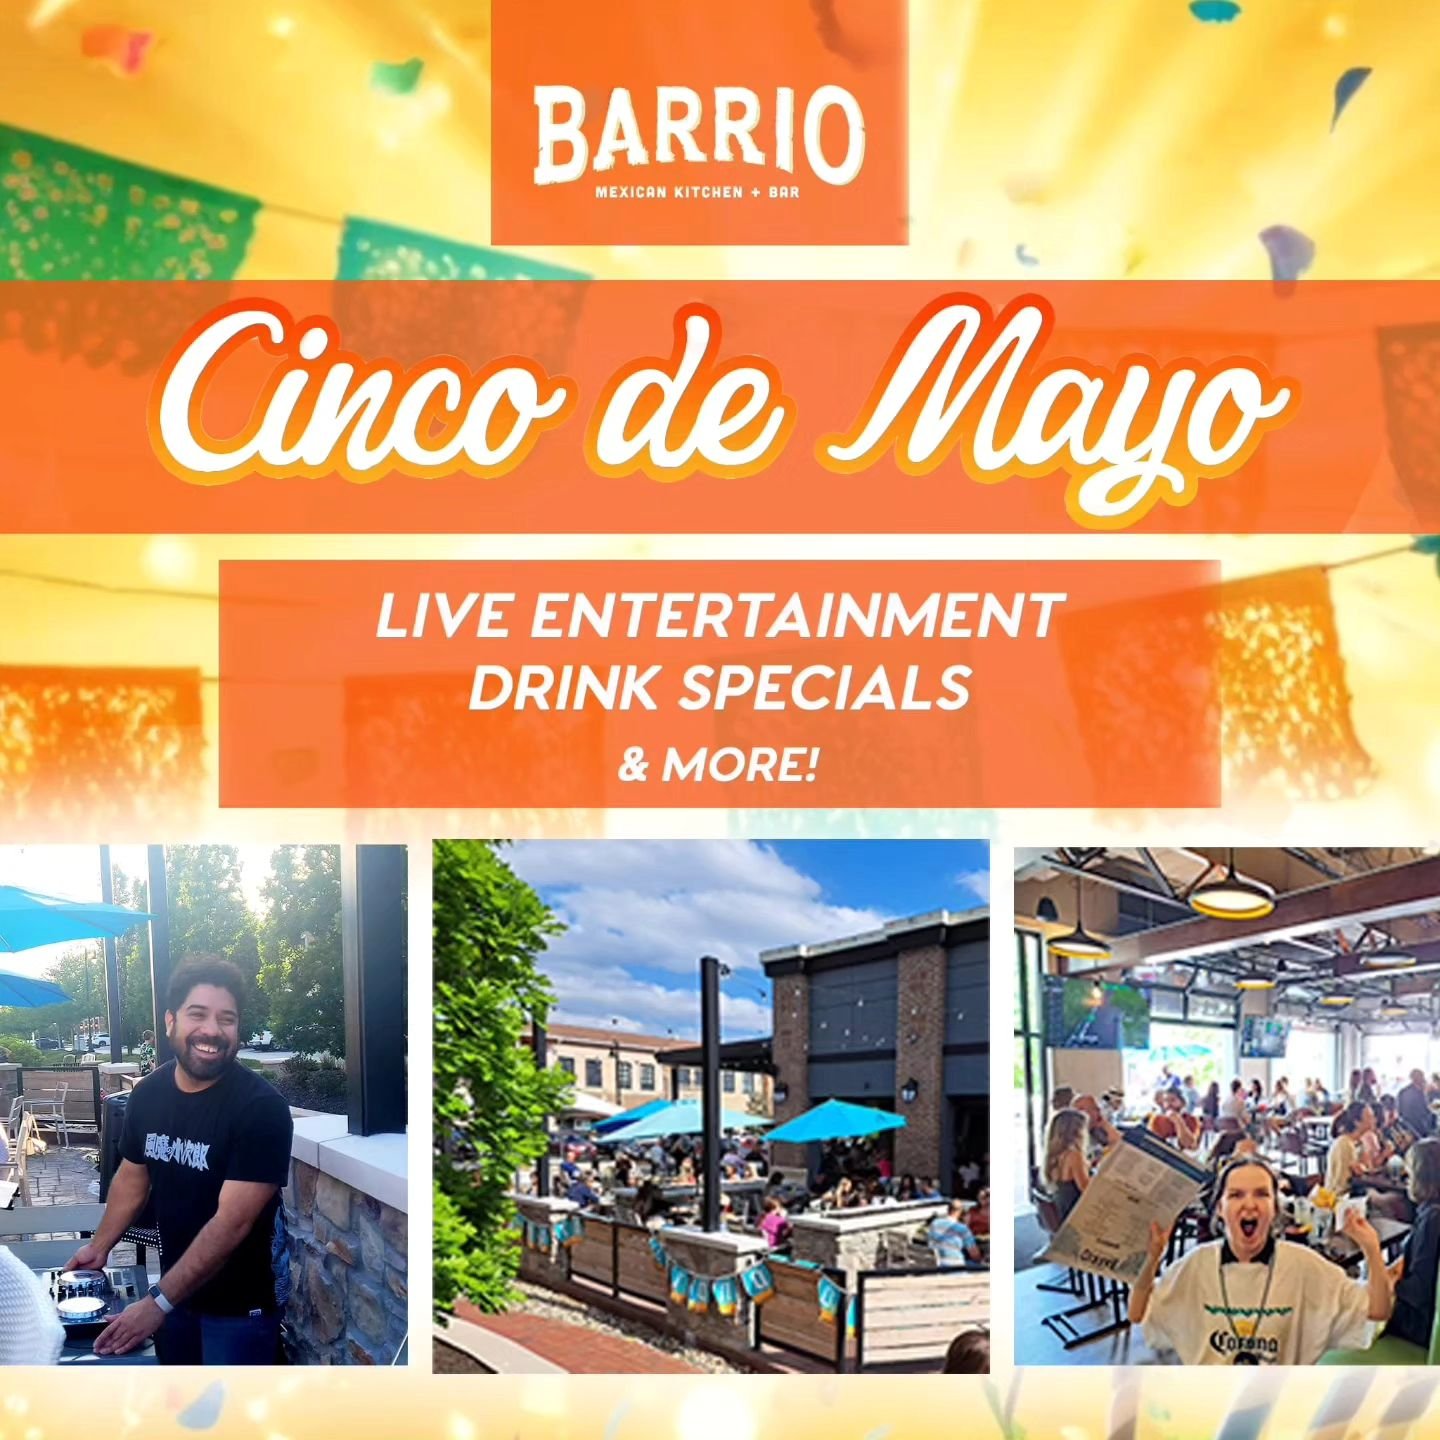 Happy Cinco de Mayo! We're excited to celebrate with you! 🥳🎉